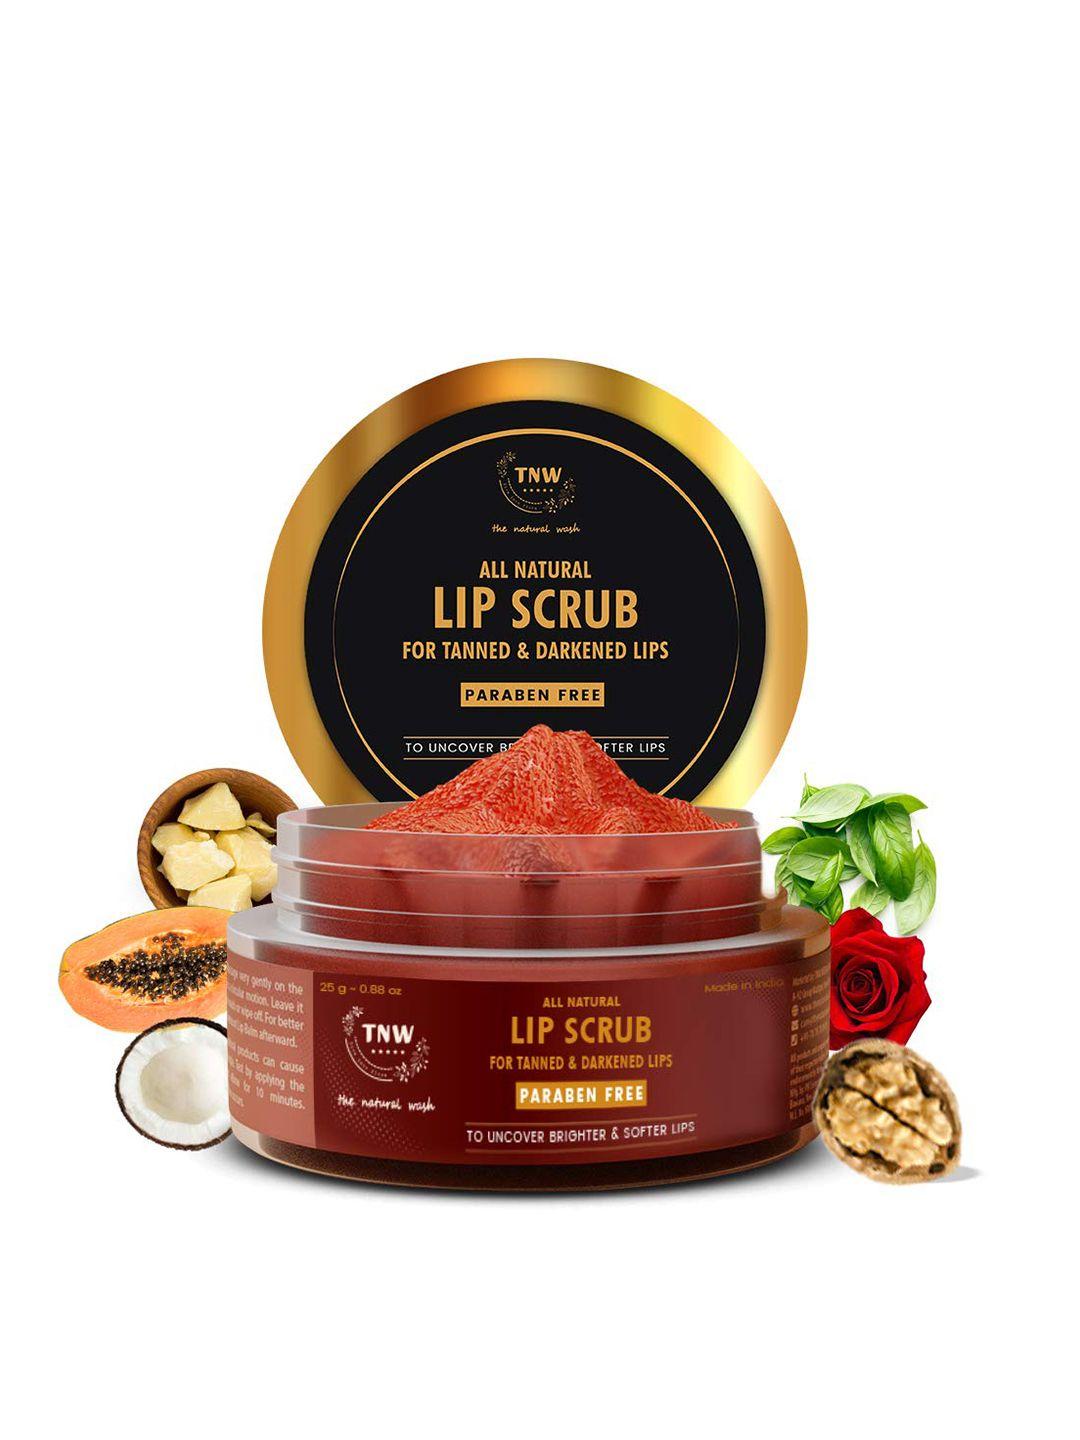 tnw the natural wash lip scrub for tanned & darkened lips with brown sugar - 25 g